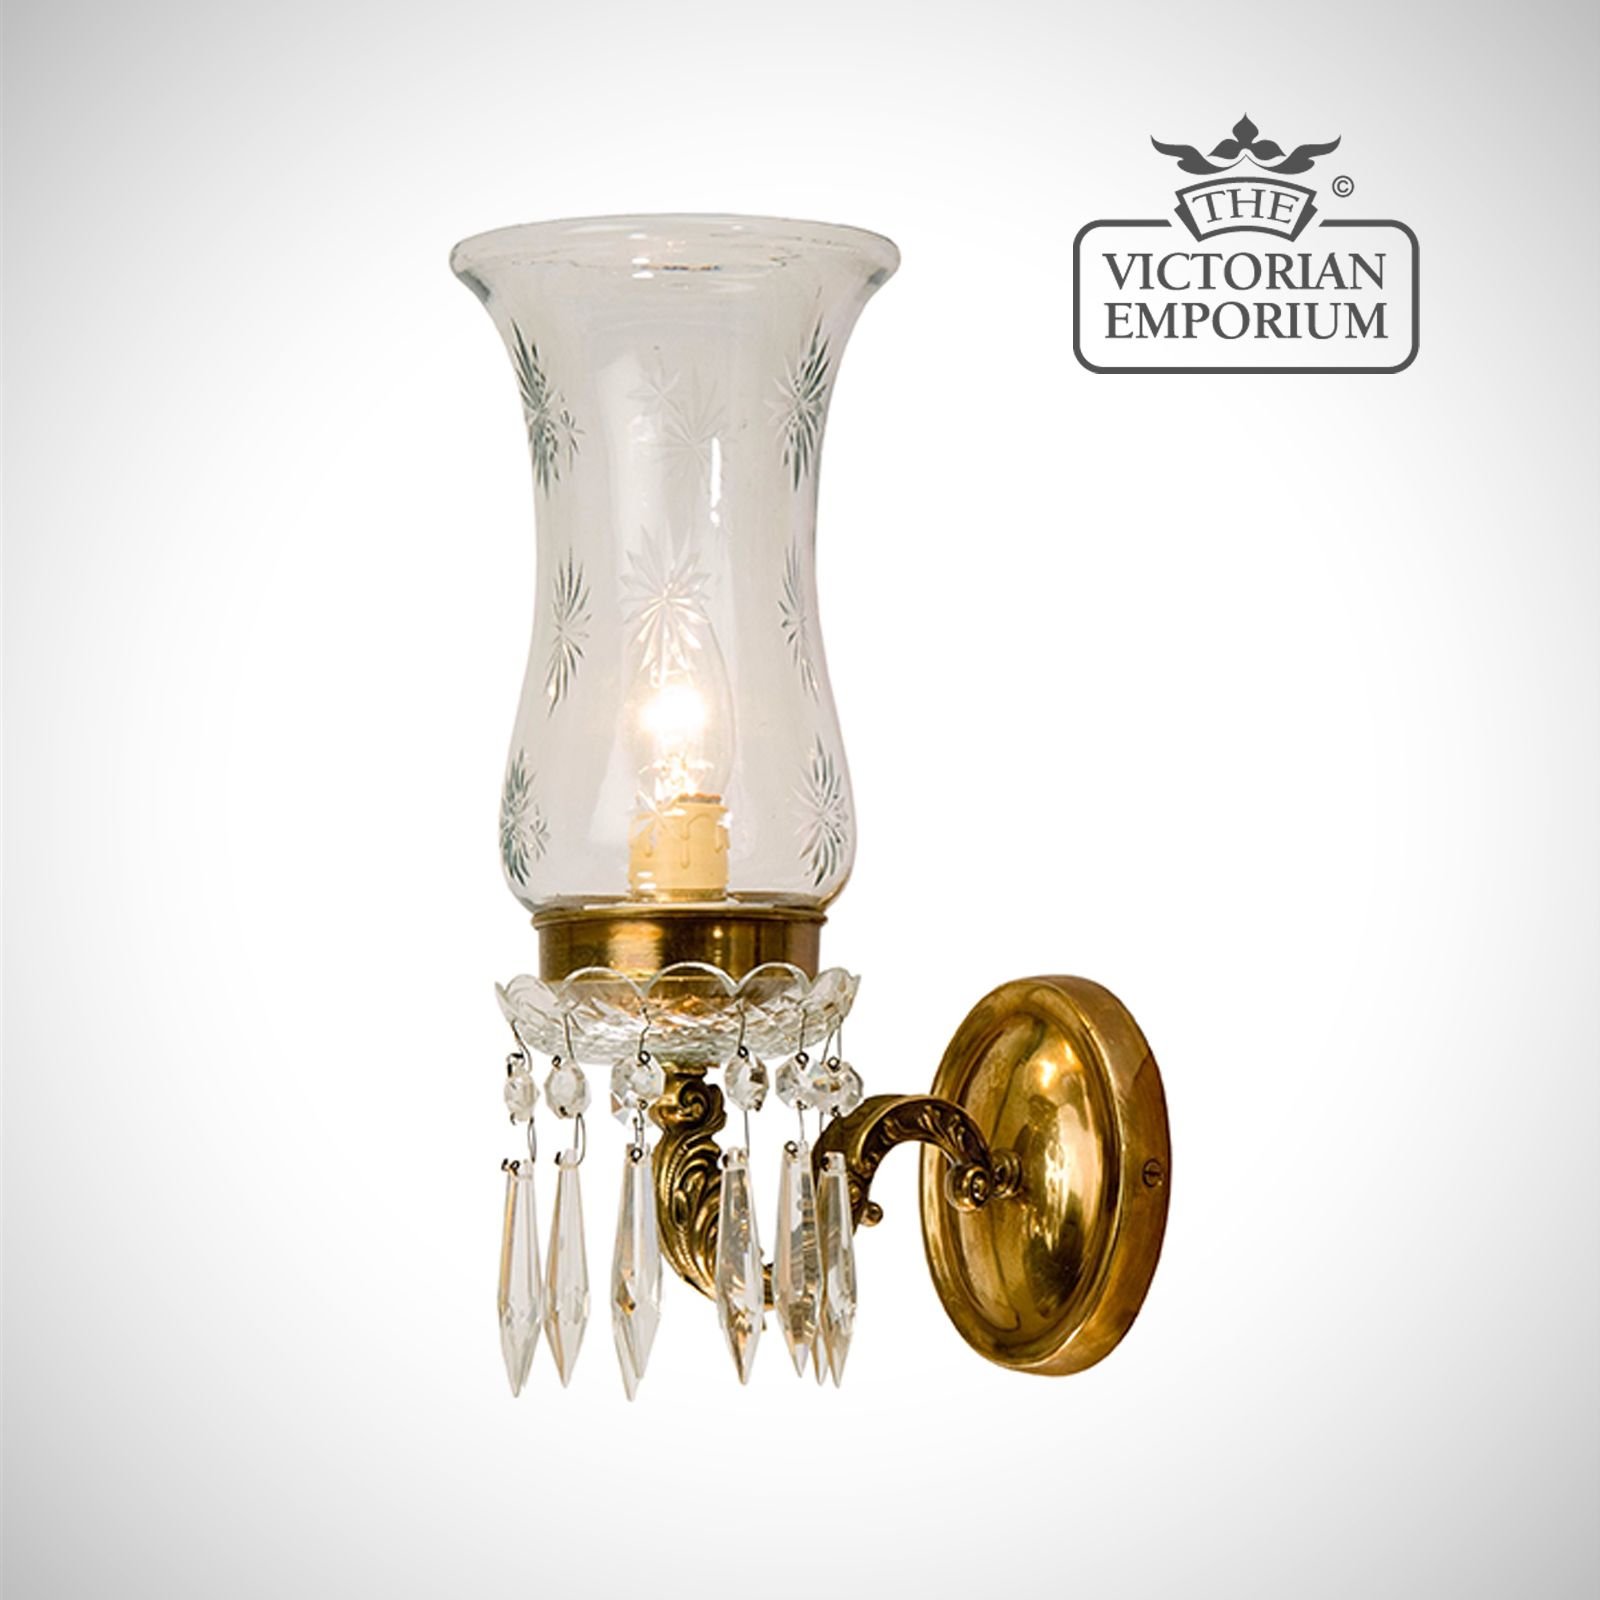 Wall sconce with a cut glass shade